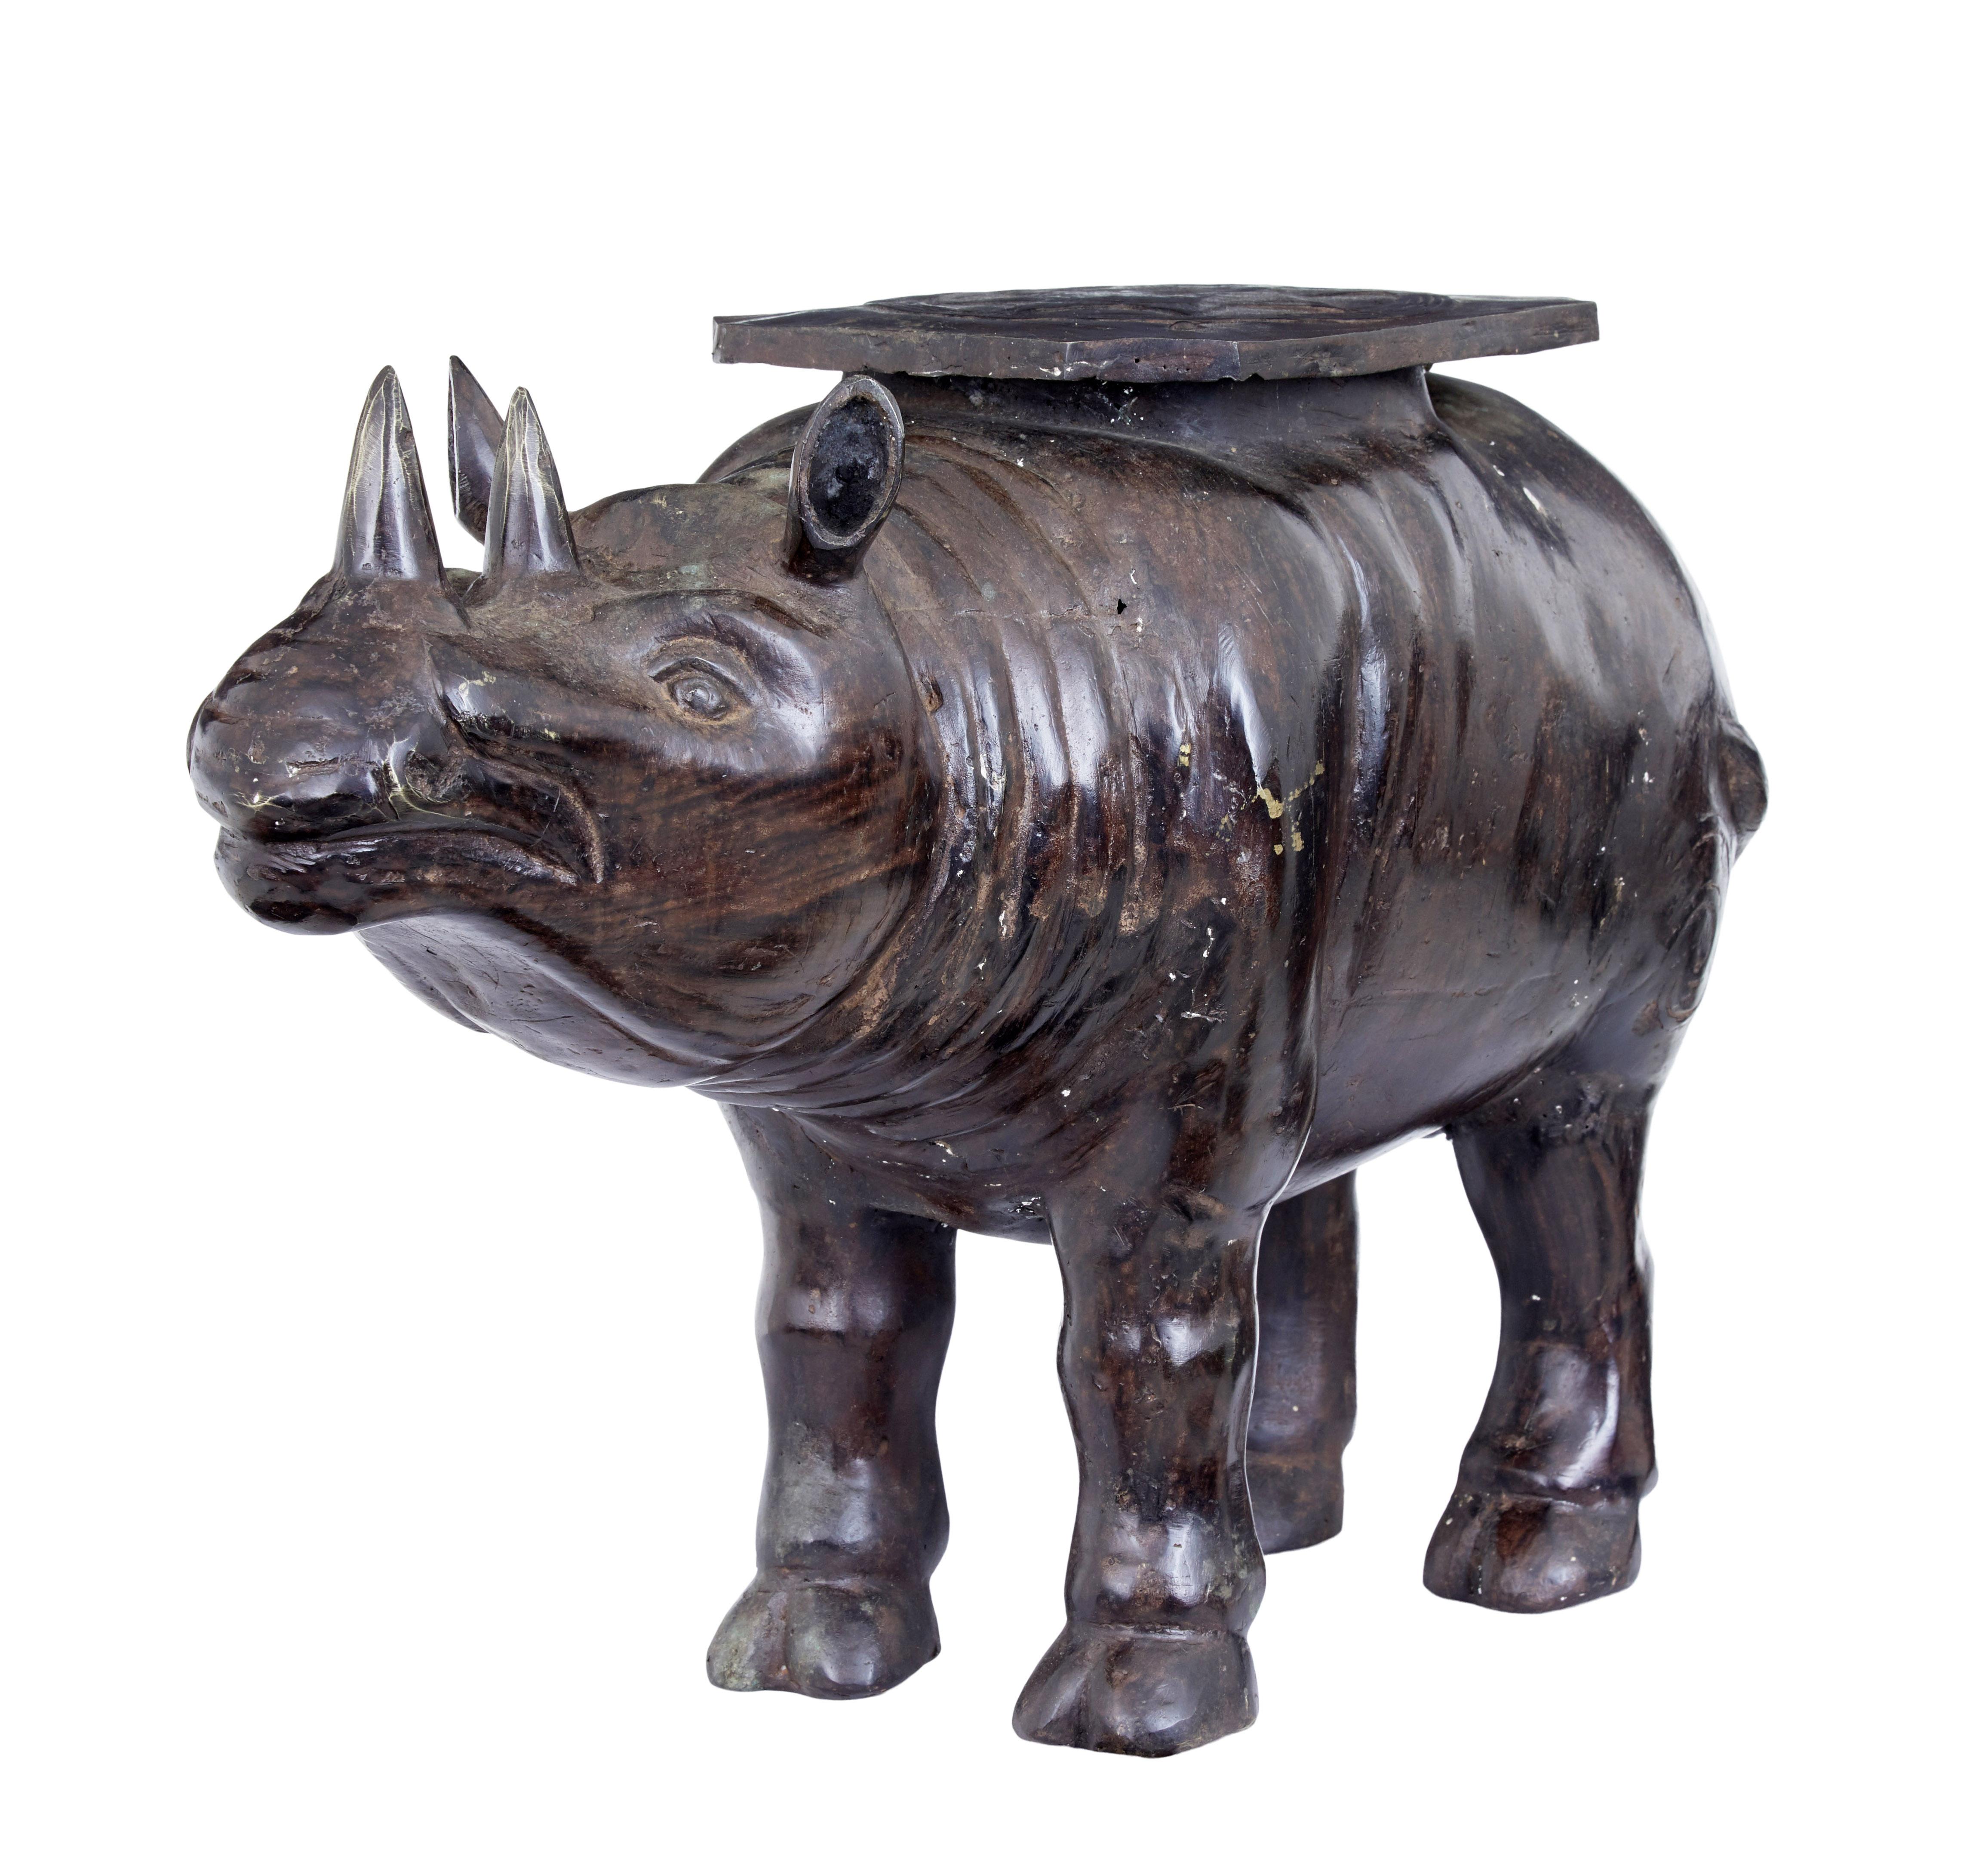 Early 20th century cast bronze rhino occasional table, circa 1920.

Delightful cast bronze eastern region side table in the form of a rhino. Superb quality minature rhino with a octagonal serving surface on its back, decorated with a star